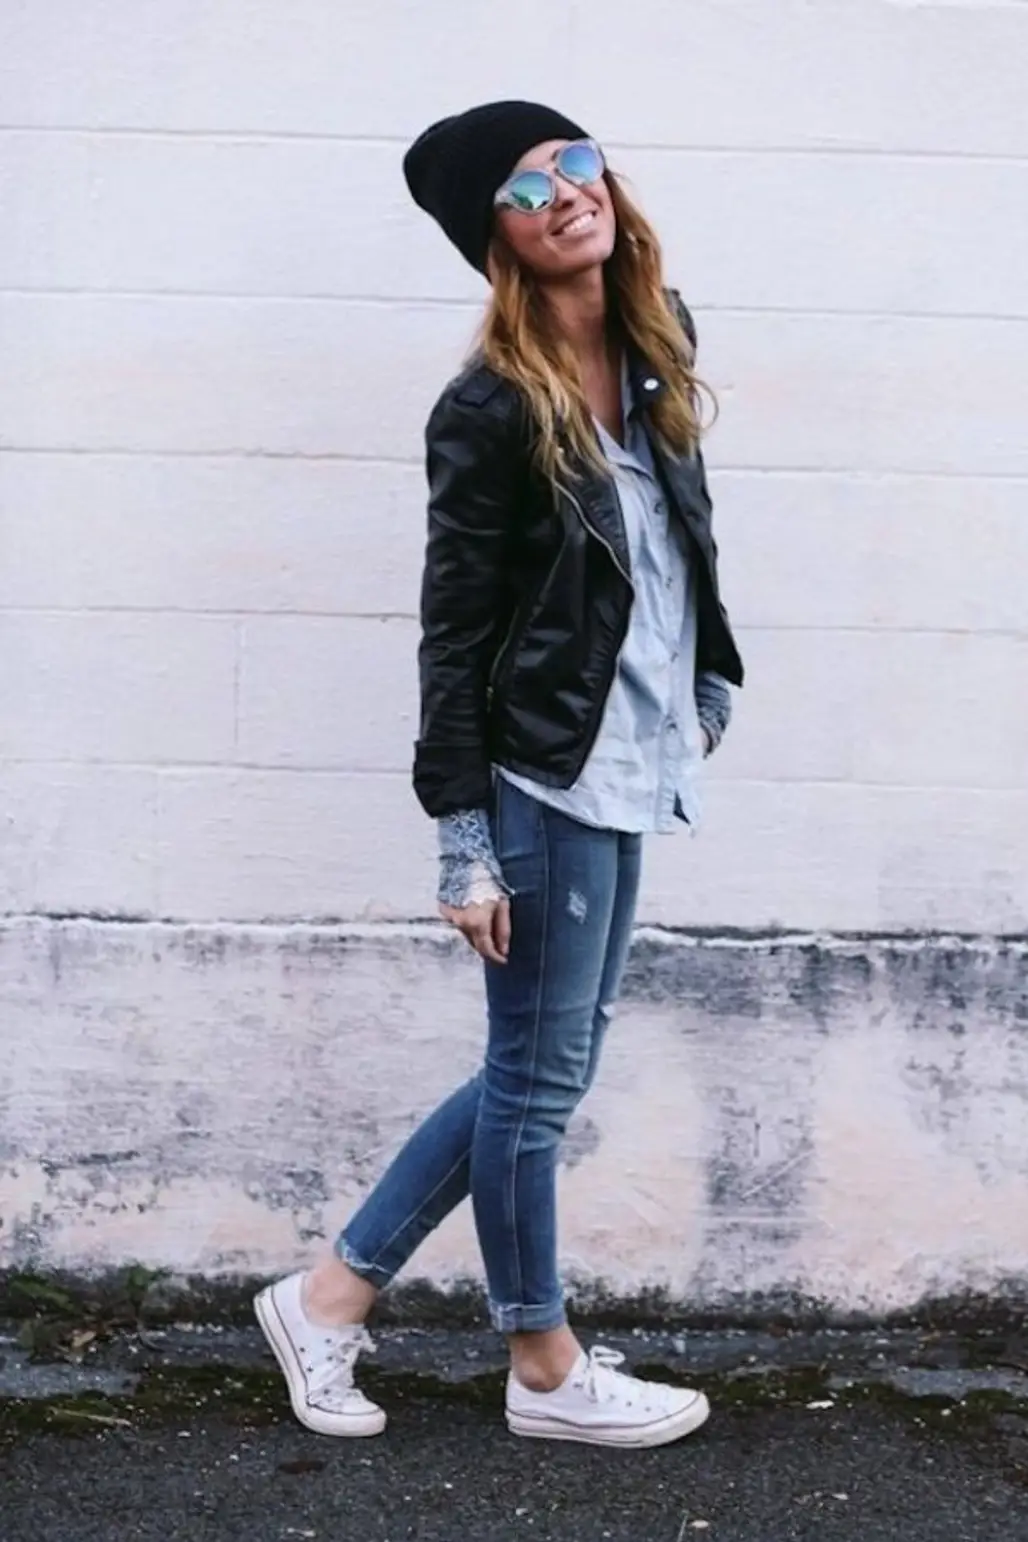 Cute All over: Skinny Jeans, Leather Jacket and a Black Beanie